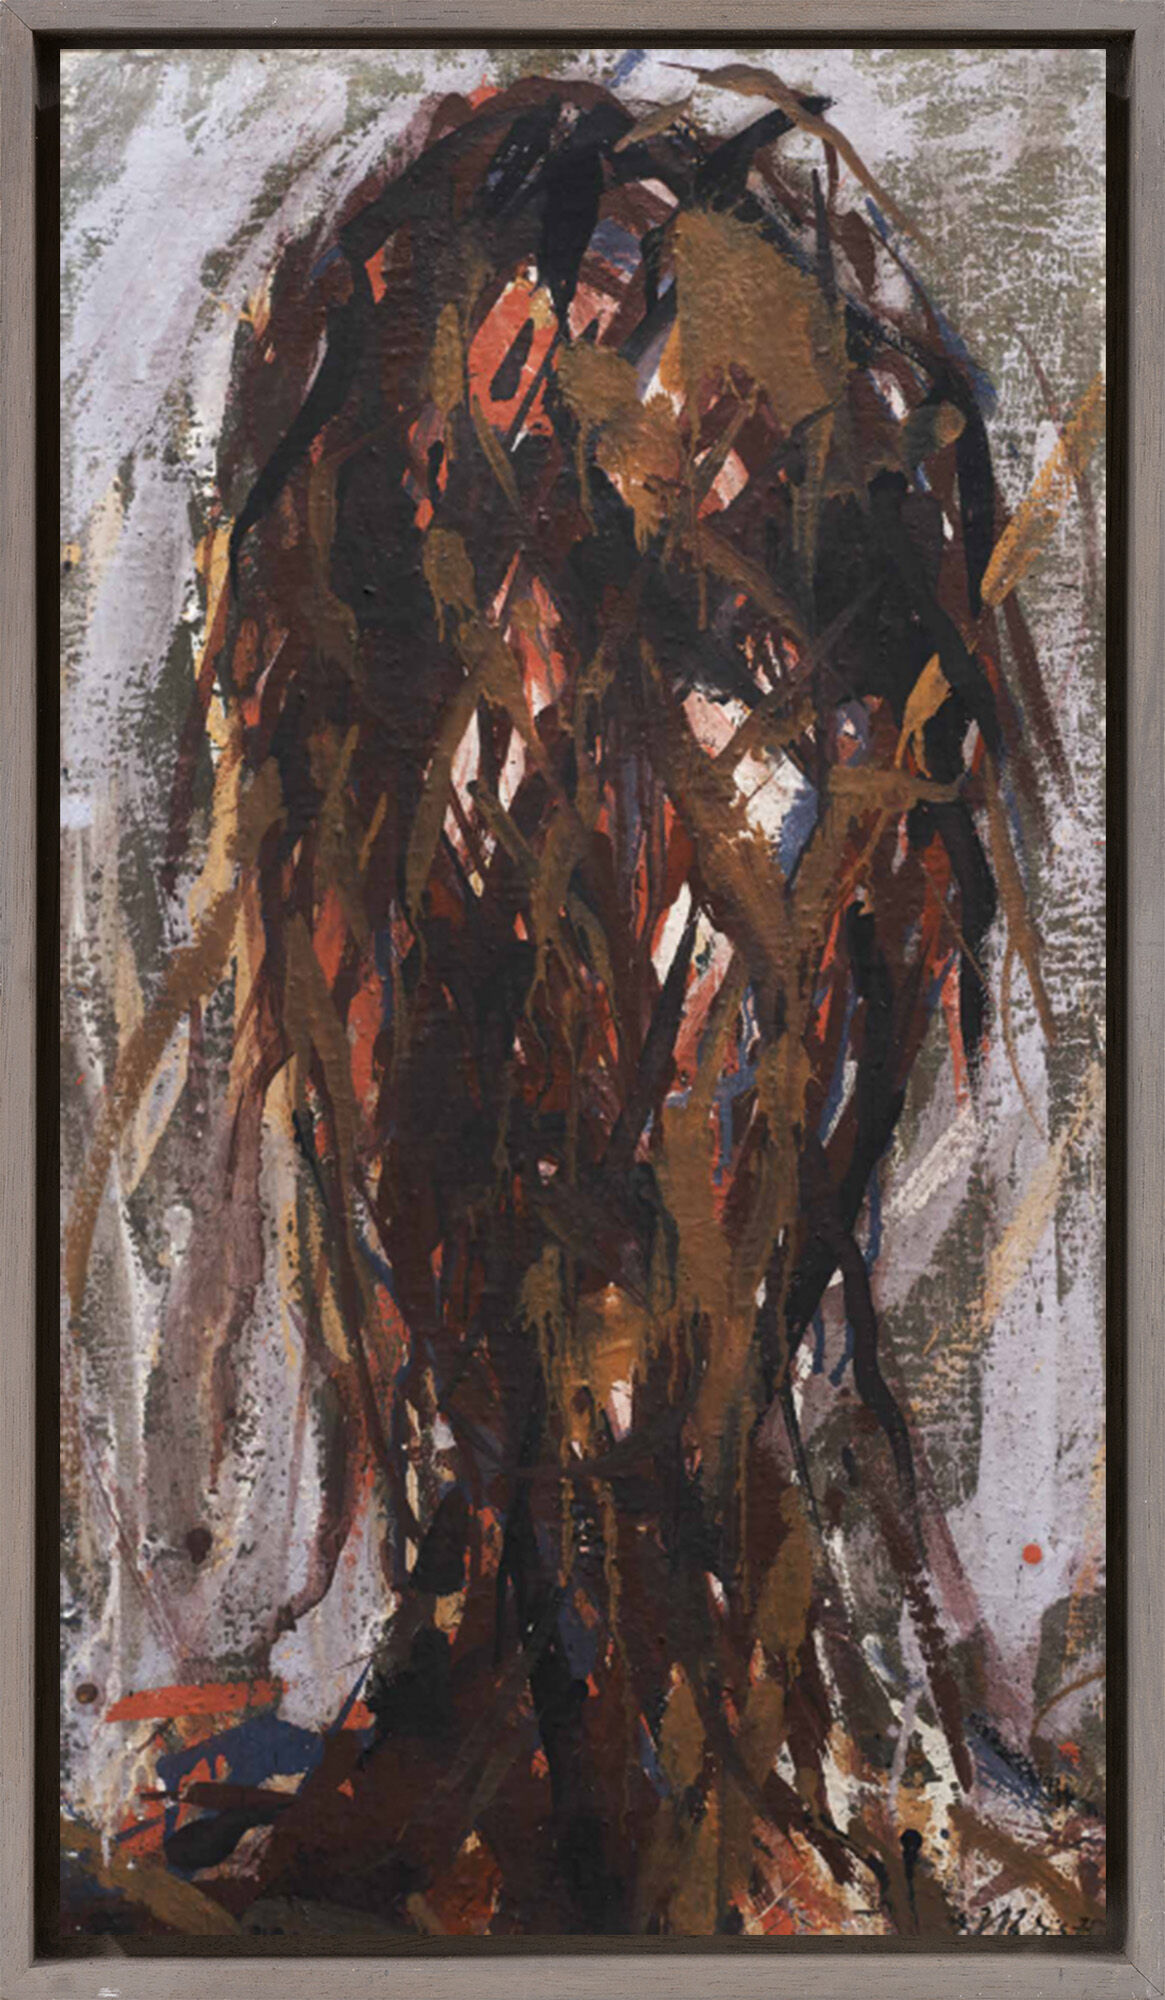 Picture "O.T. (Head)" (1978) (Unique piece) by Max Uhlig